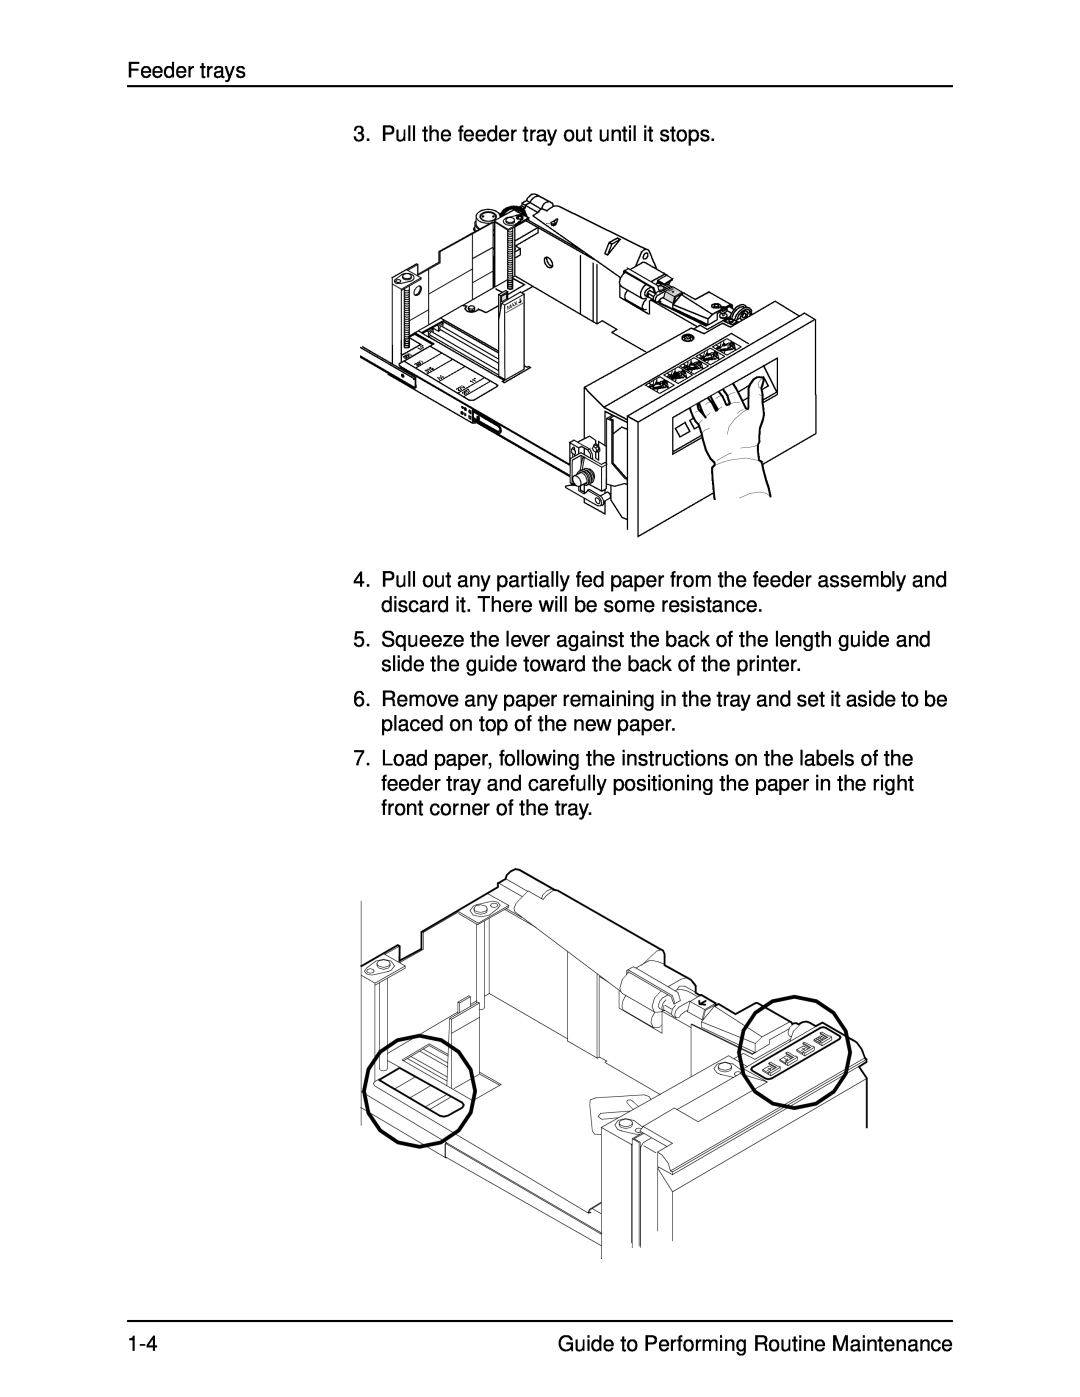 Xerox DocuPrint 96 manual Feeder trays, Pull the feeder tray out until it stops, Guide to Performing Routine Maintenance 